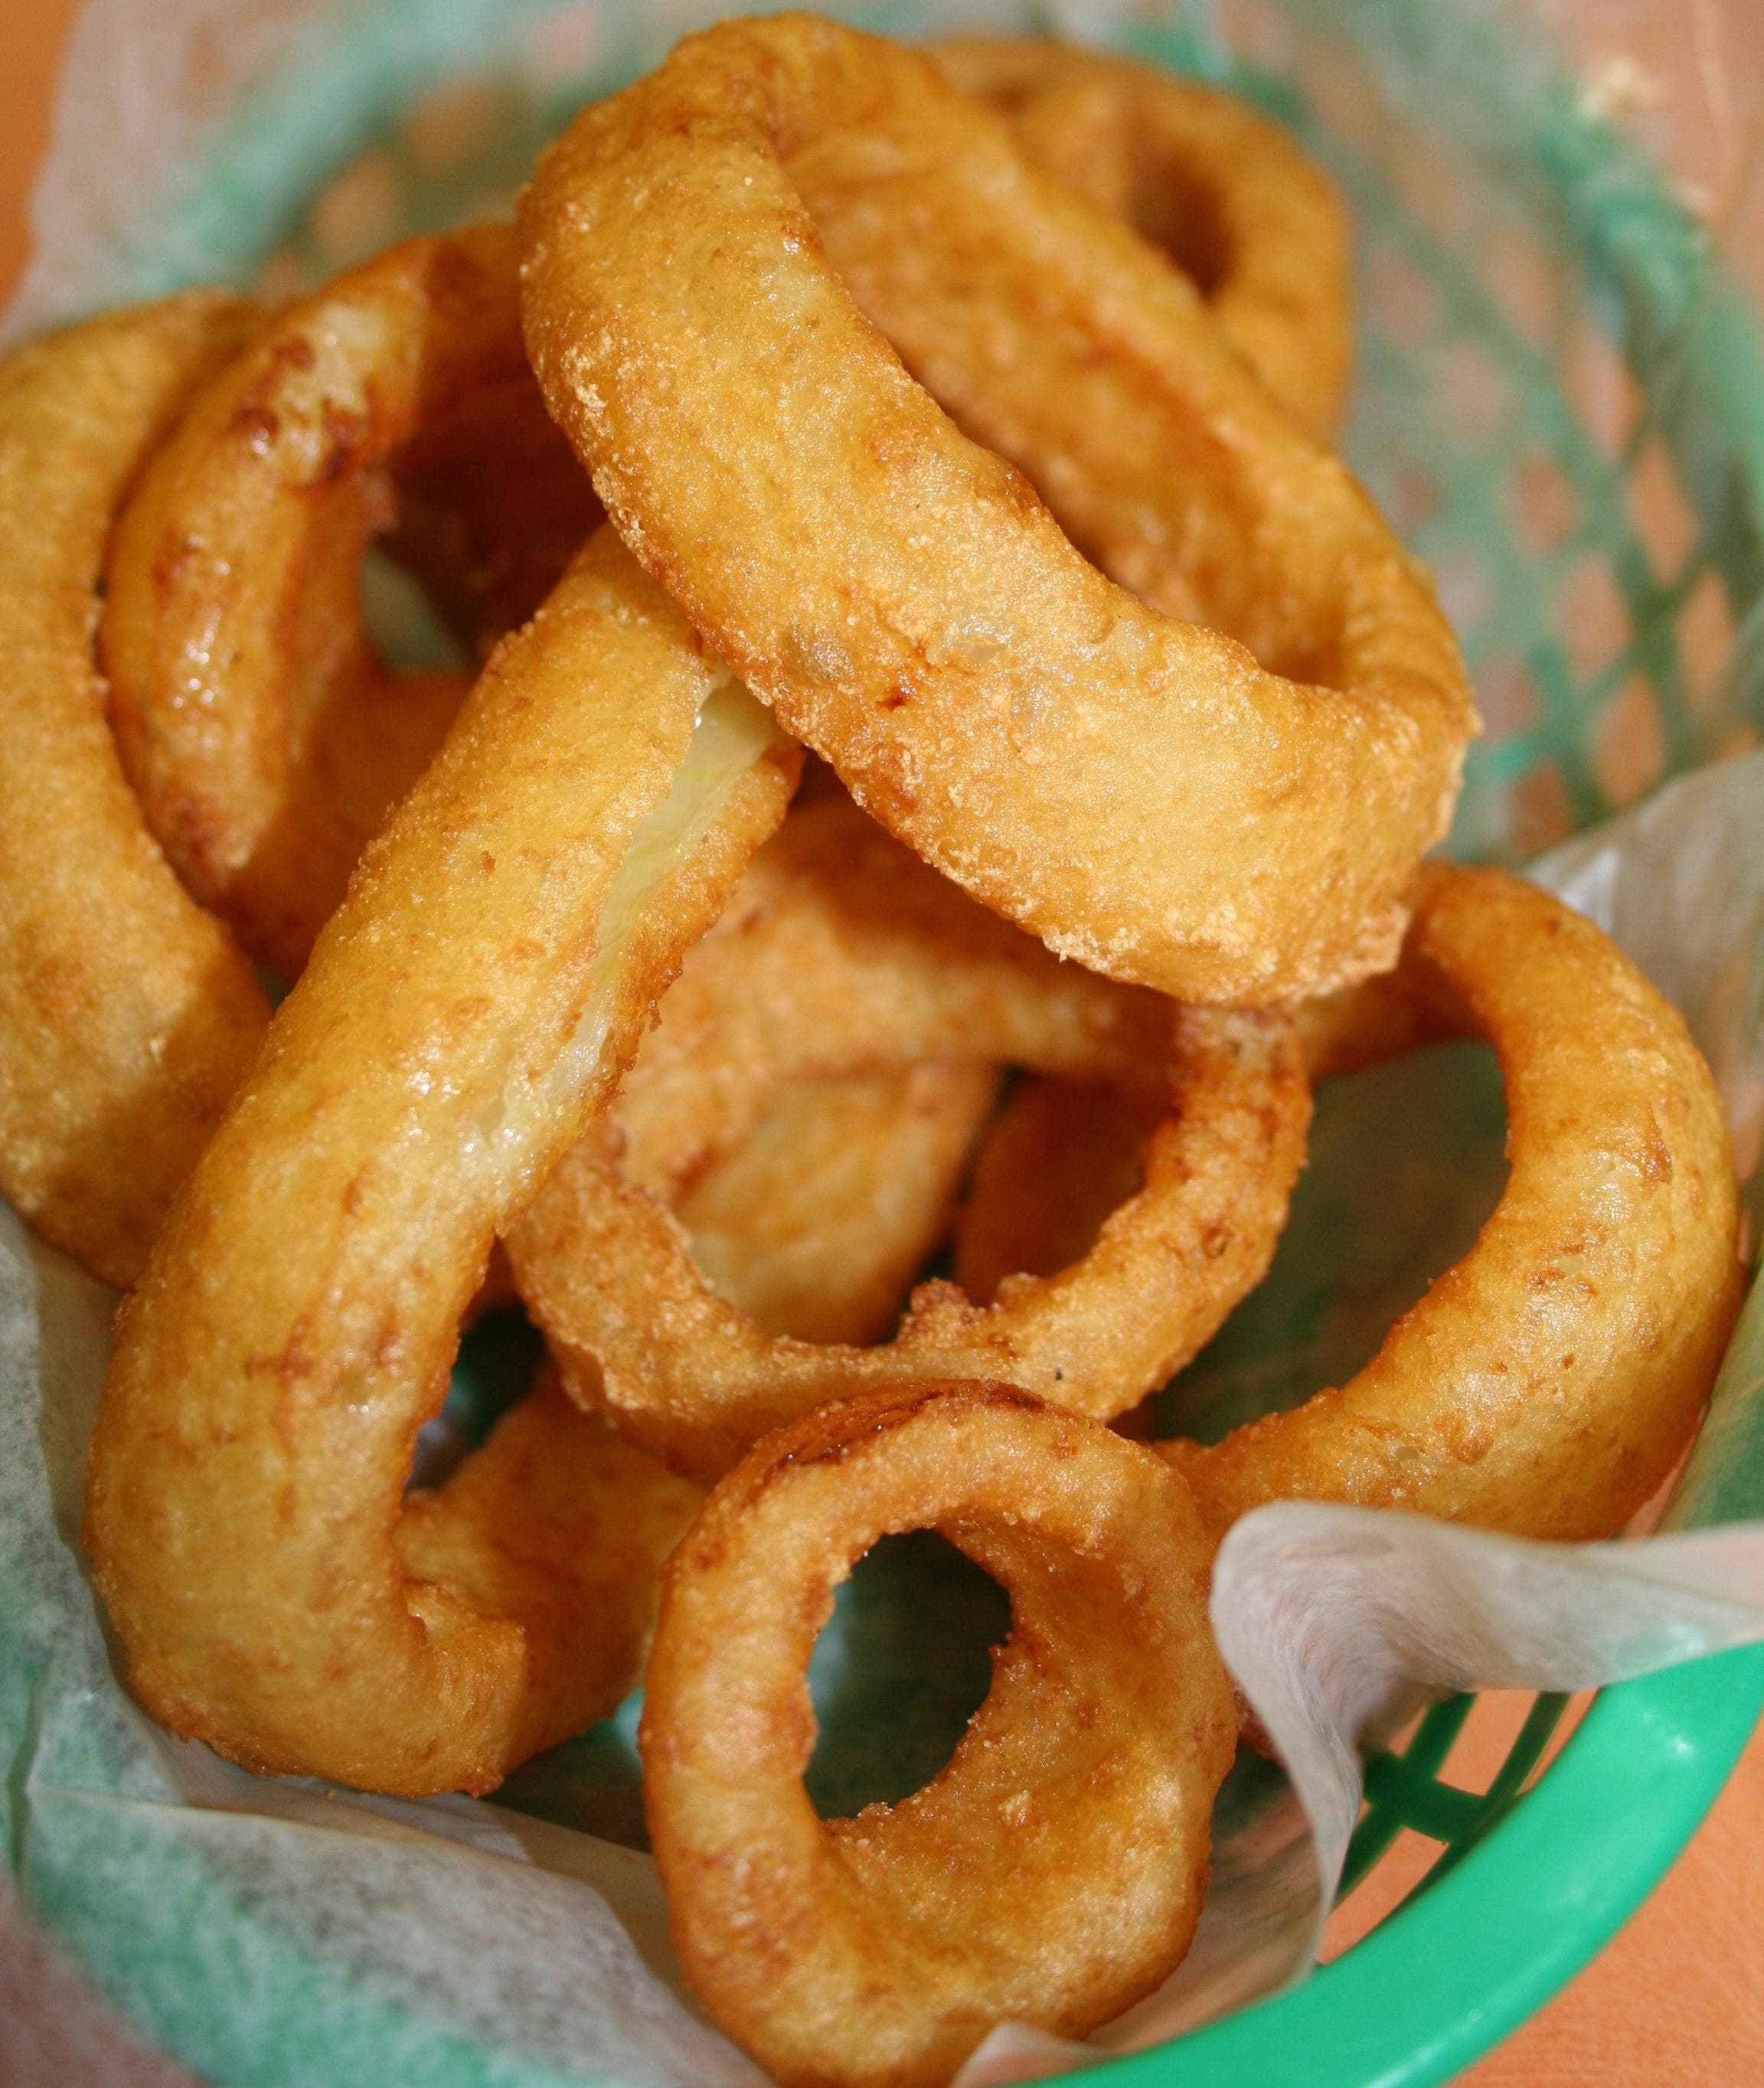 Onion ring on Random Most Delicious Foods to Dunk of Deep Fry